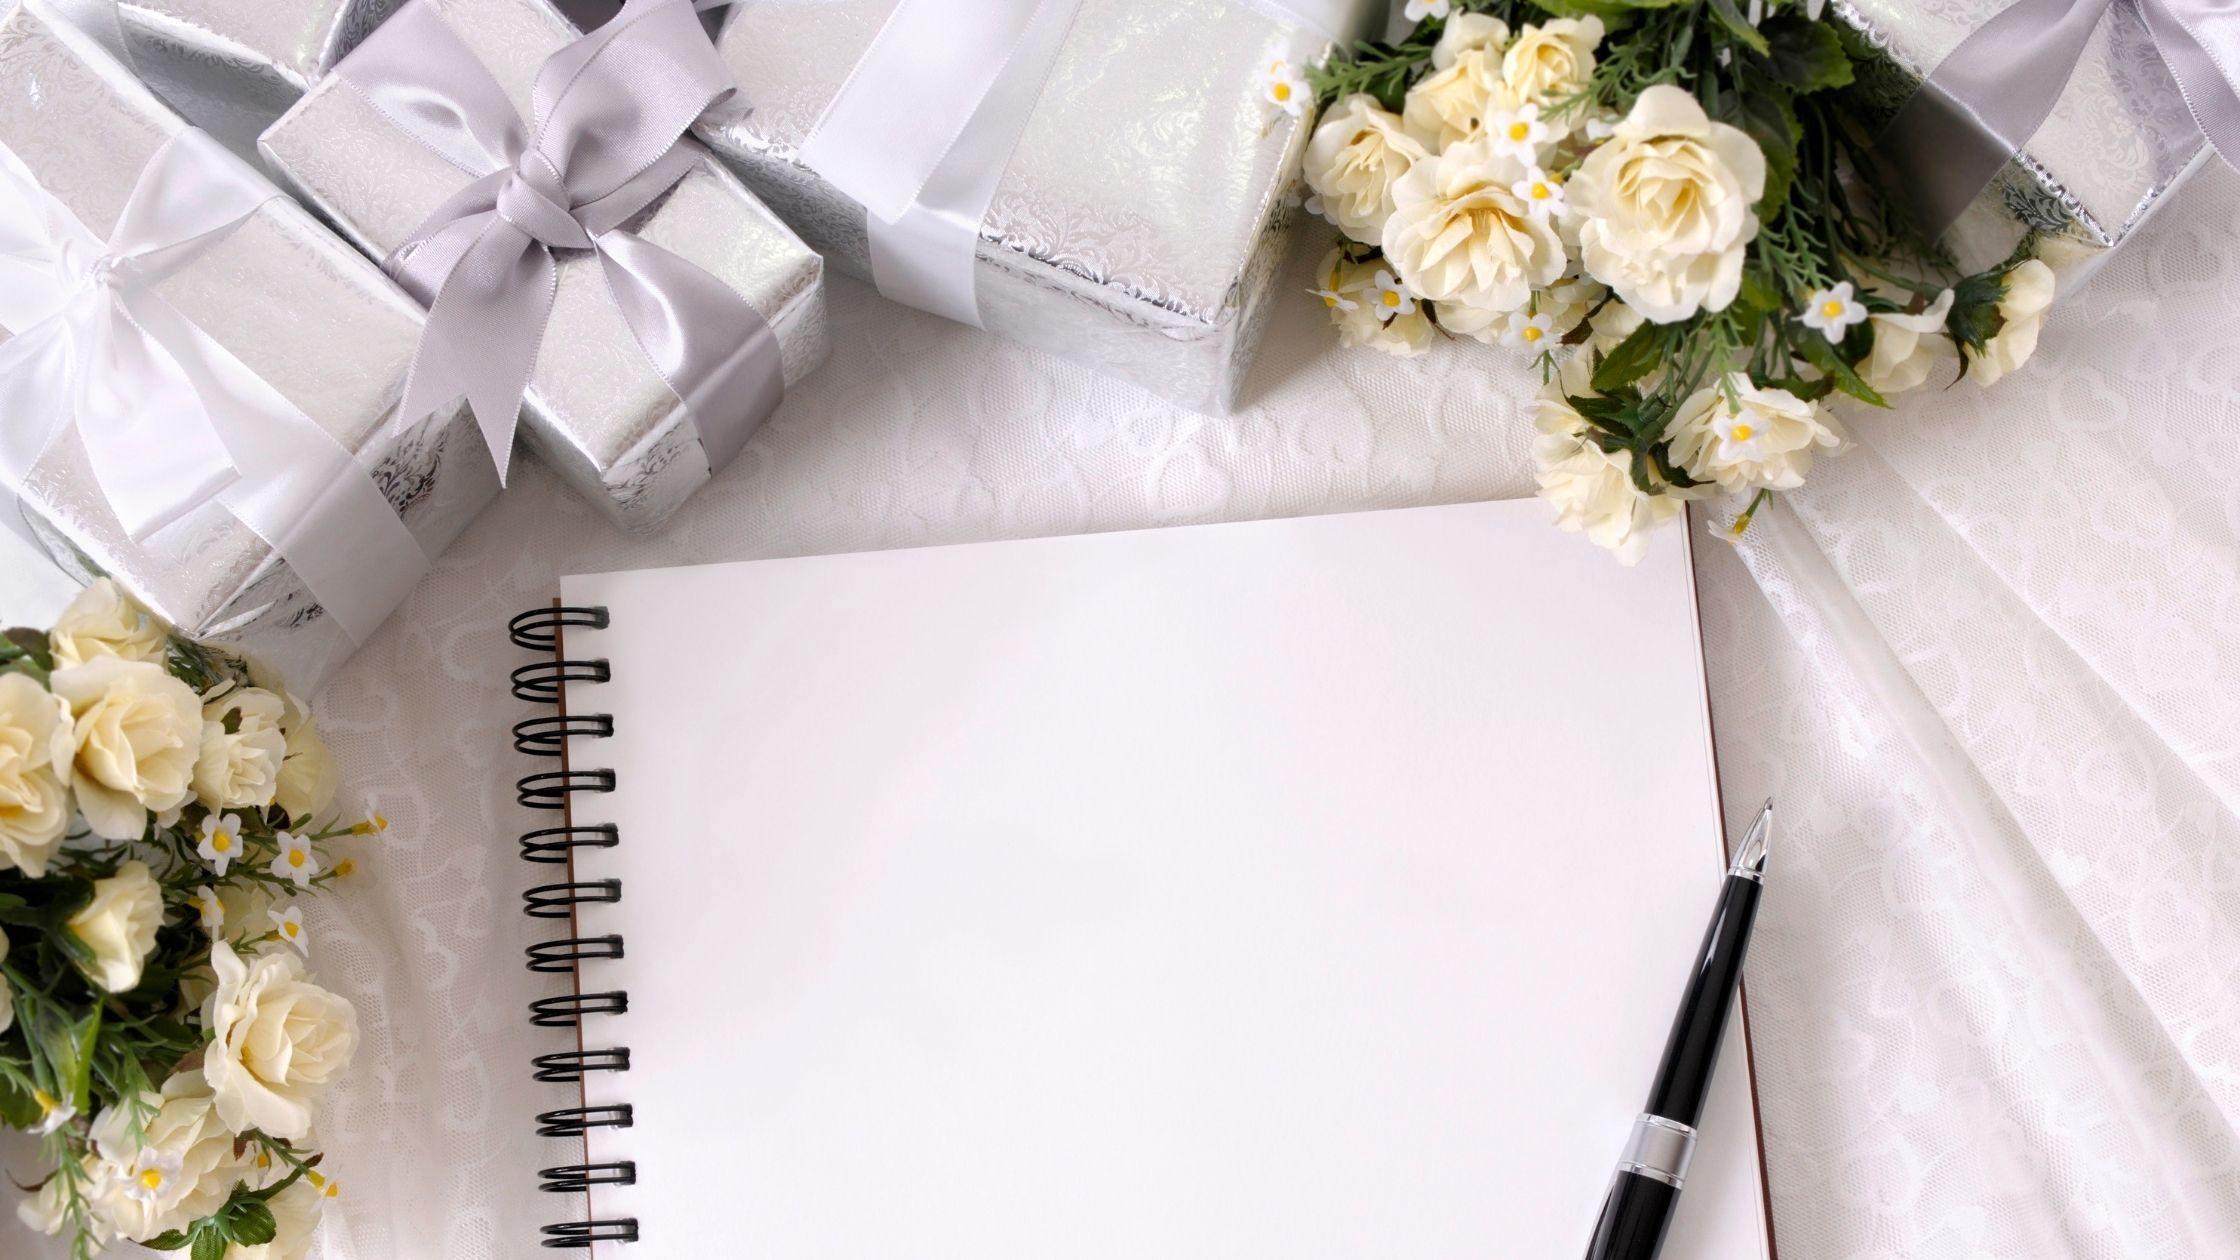 The Ultimate List of Things to Get for your Wedding Morning - Hoesh International Ltd